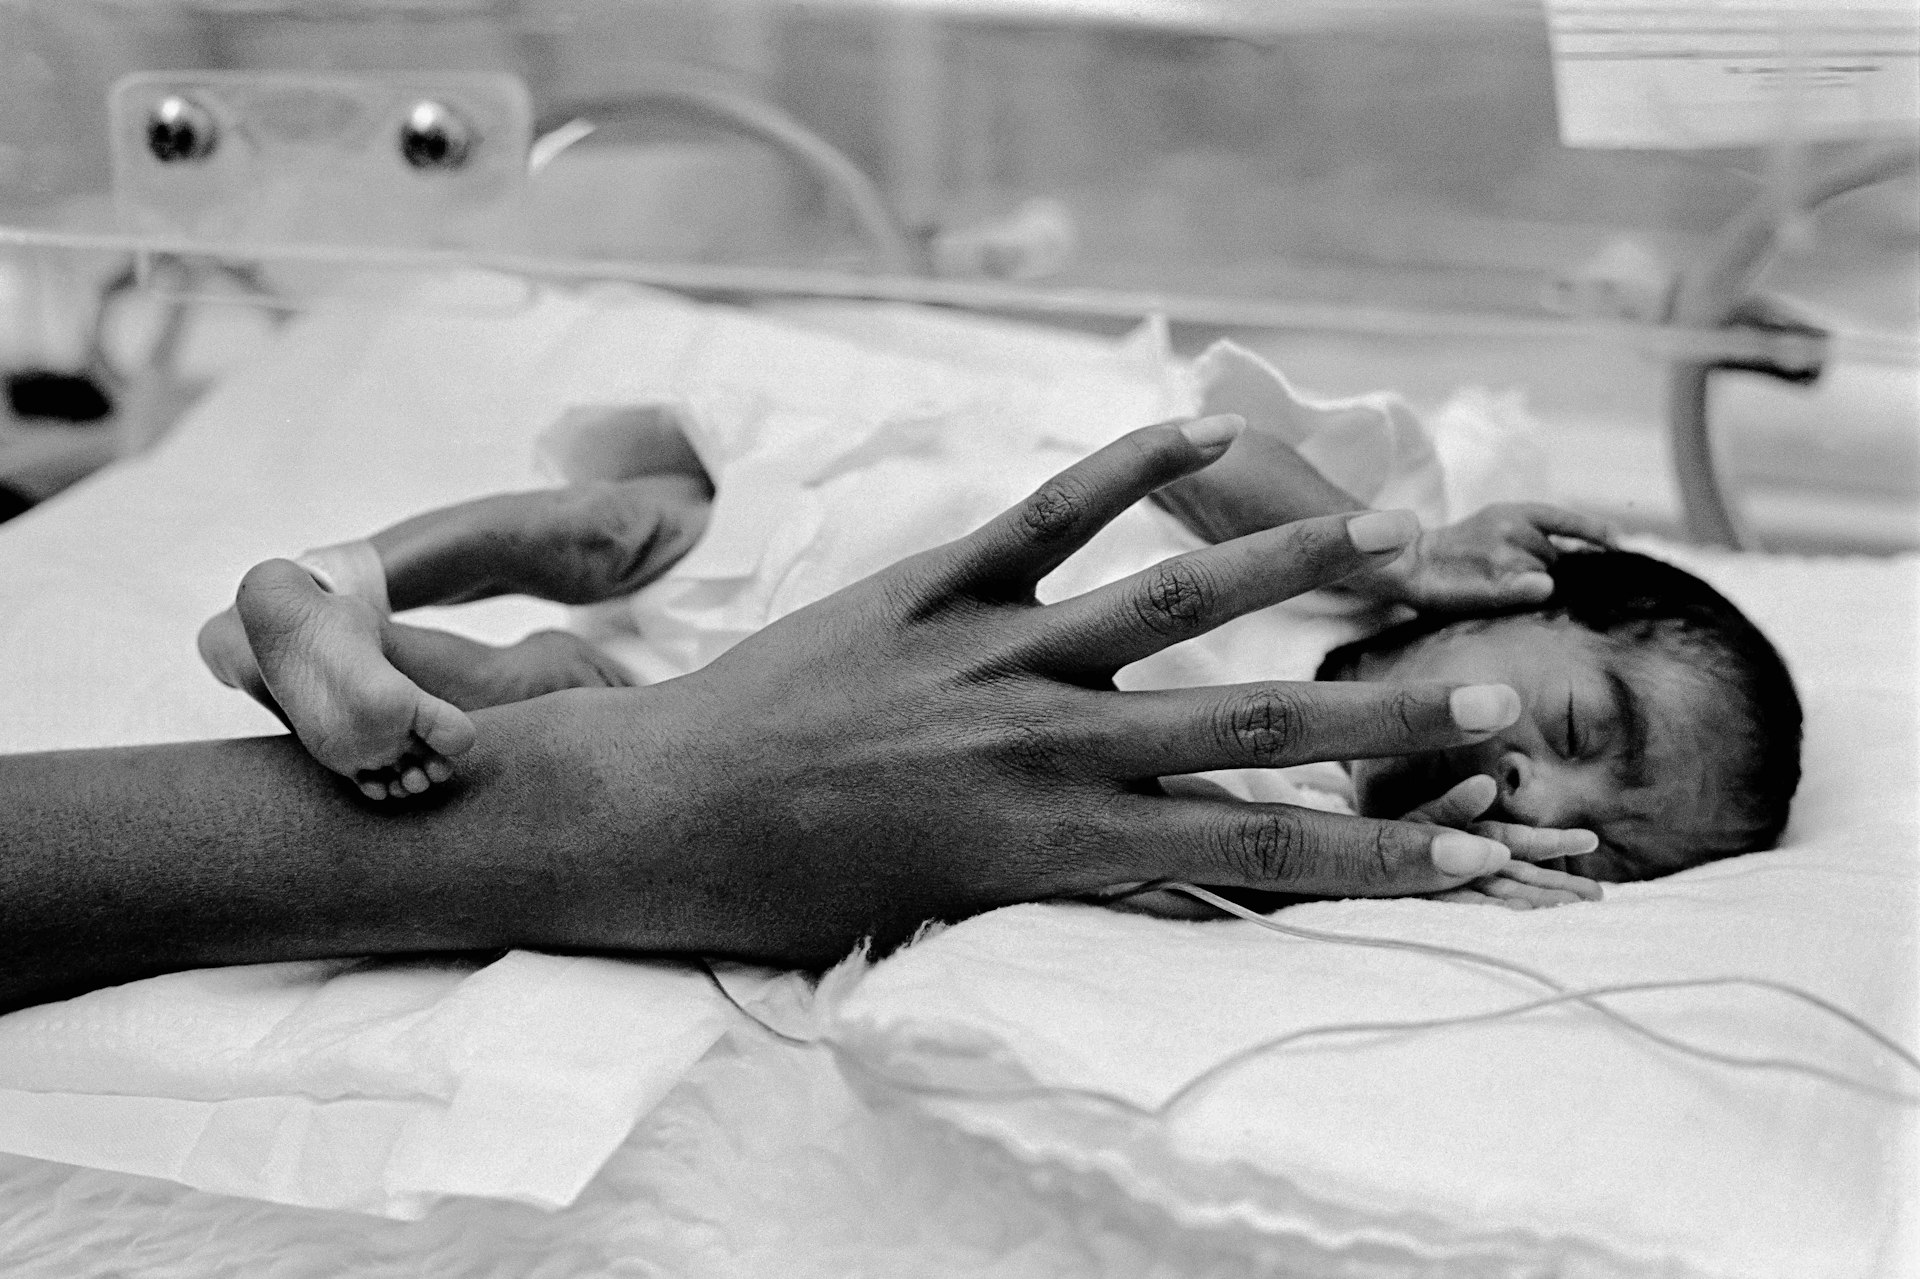 Phoenix. Preemie Baby unit at St Joseph's Hospital. She has a head too large by half for her body. With little to flesh them out, her features are skull-tight and wizaned. Her arms and legs are no thicker than her mothers fingers. Her ears have no cartilage. Not long ago she would have been a miscarried fetus, not a baby. To-day she is a Preemie baby, although barely 2lb, destined to survive to be a normal child. 1980.